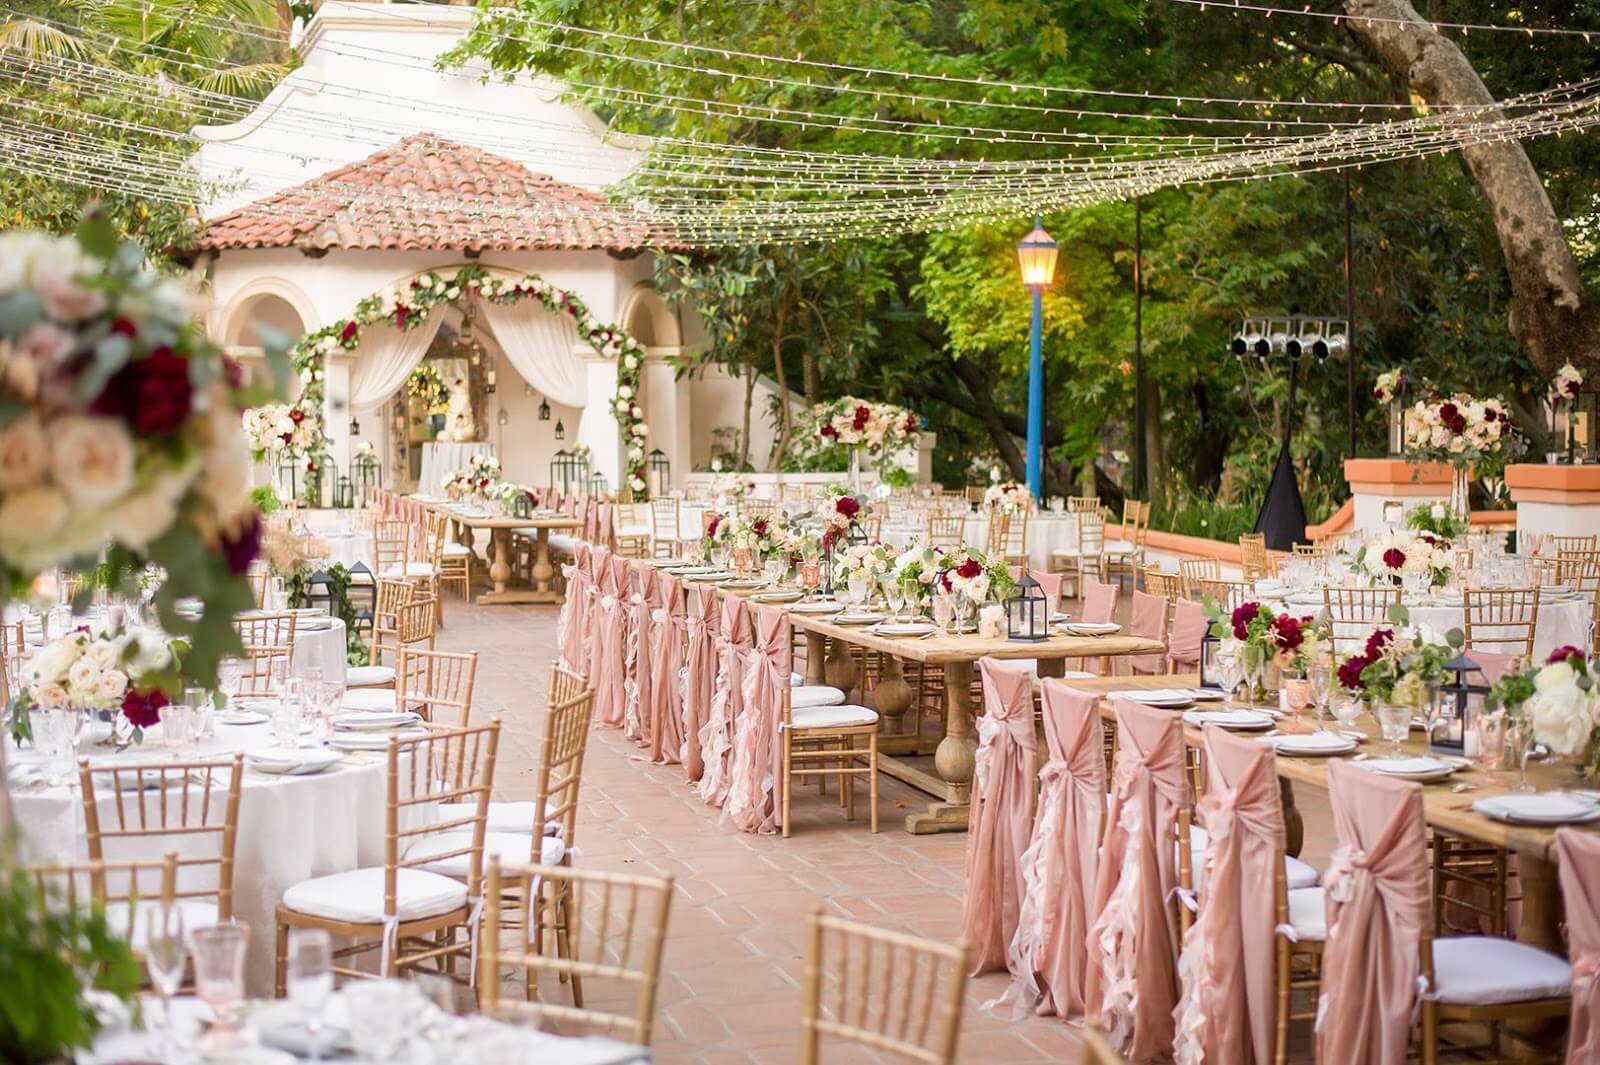 Top 10 Places to Get Married in Orange County - KLK Photography